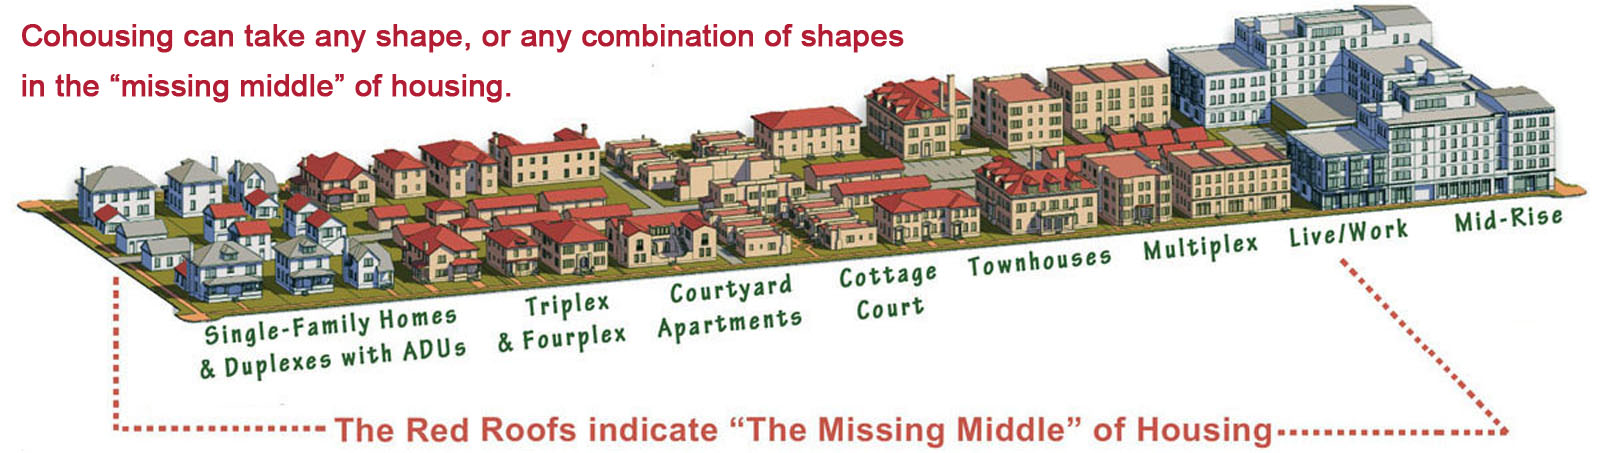 Cohousing Missing Middle